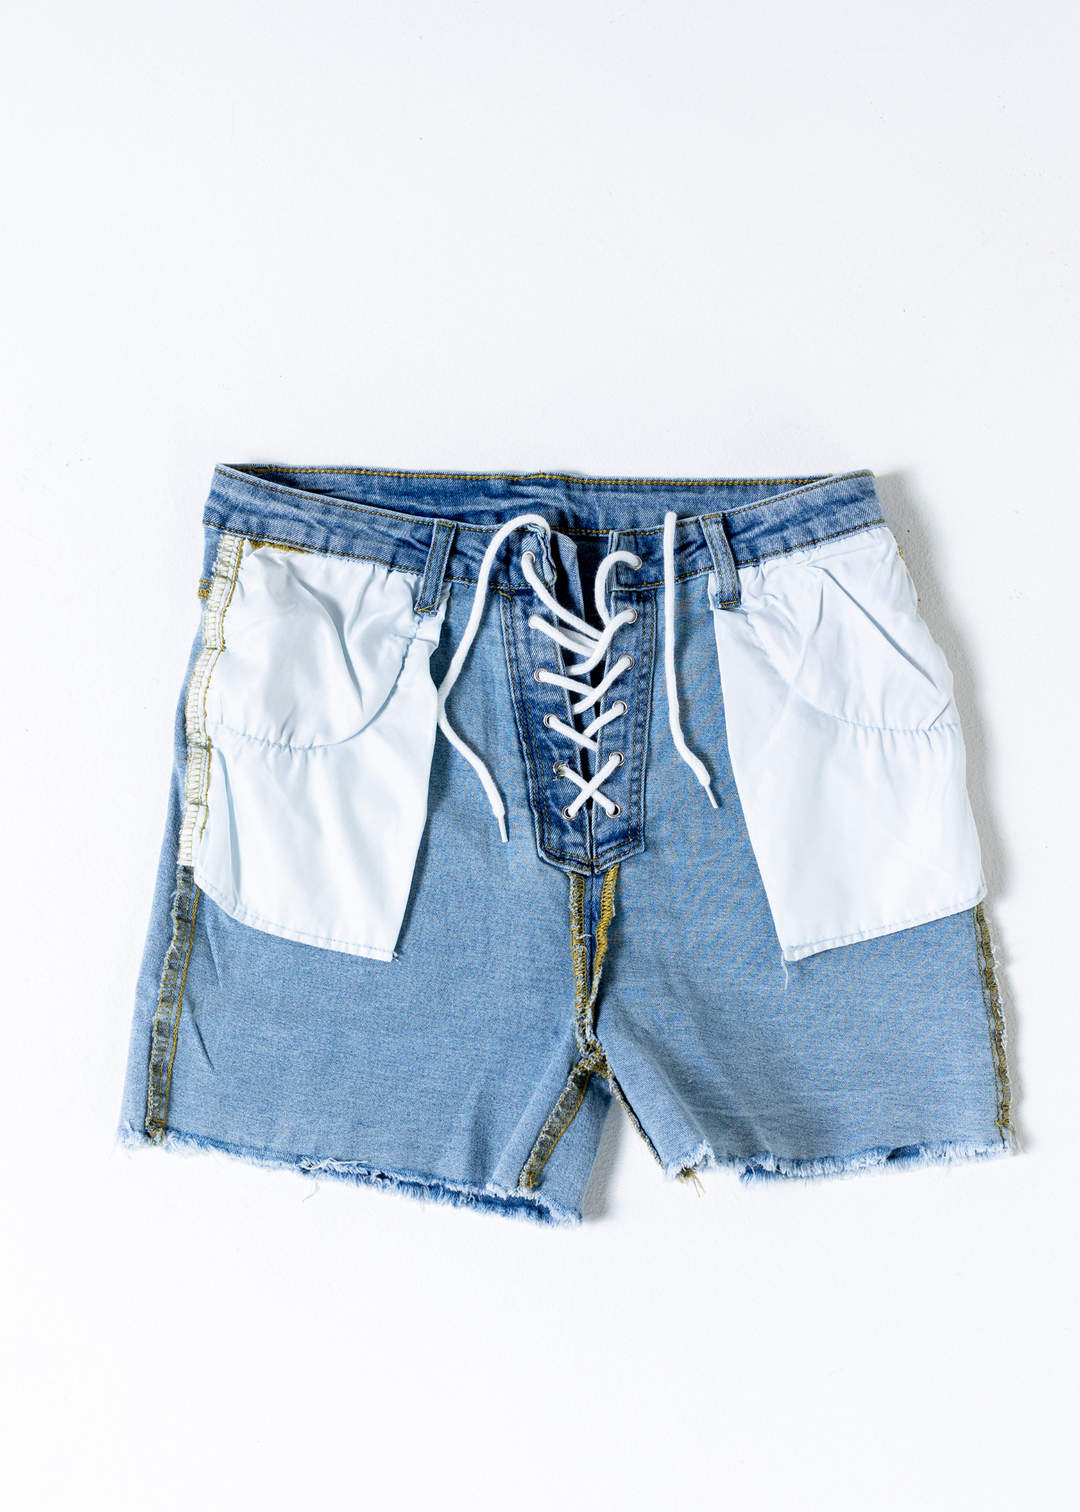 Tie Me Down Shorts